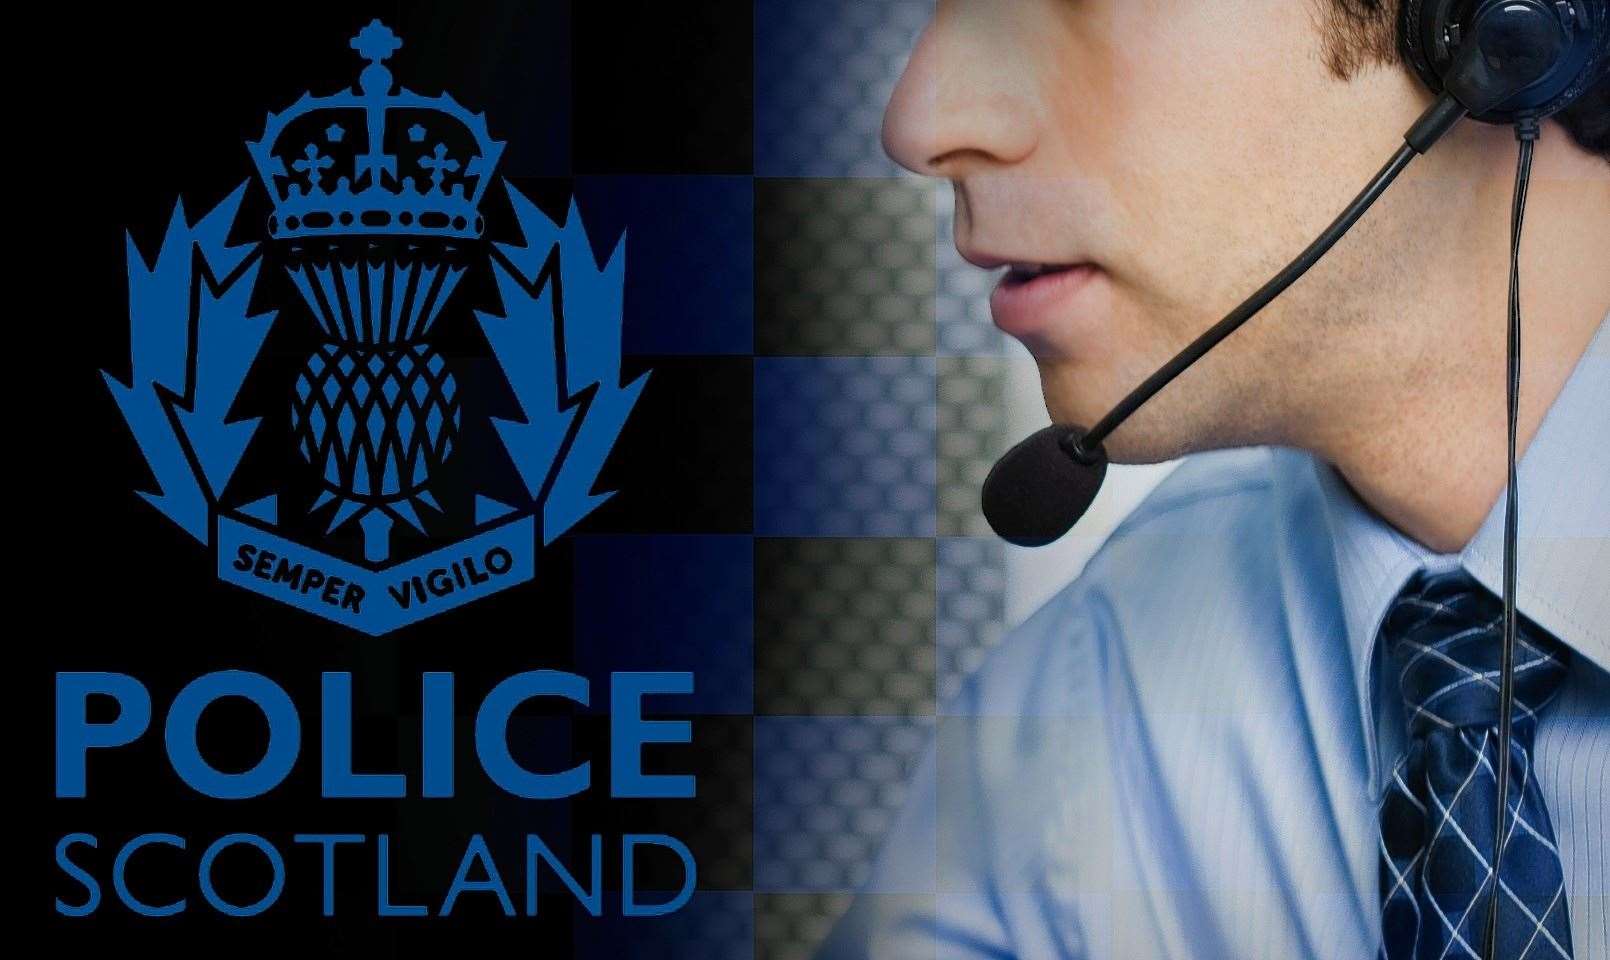 Police Scotland has appealed for information.